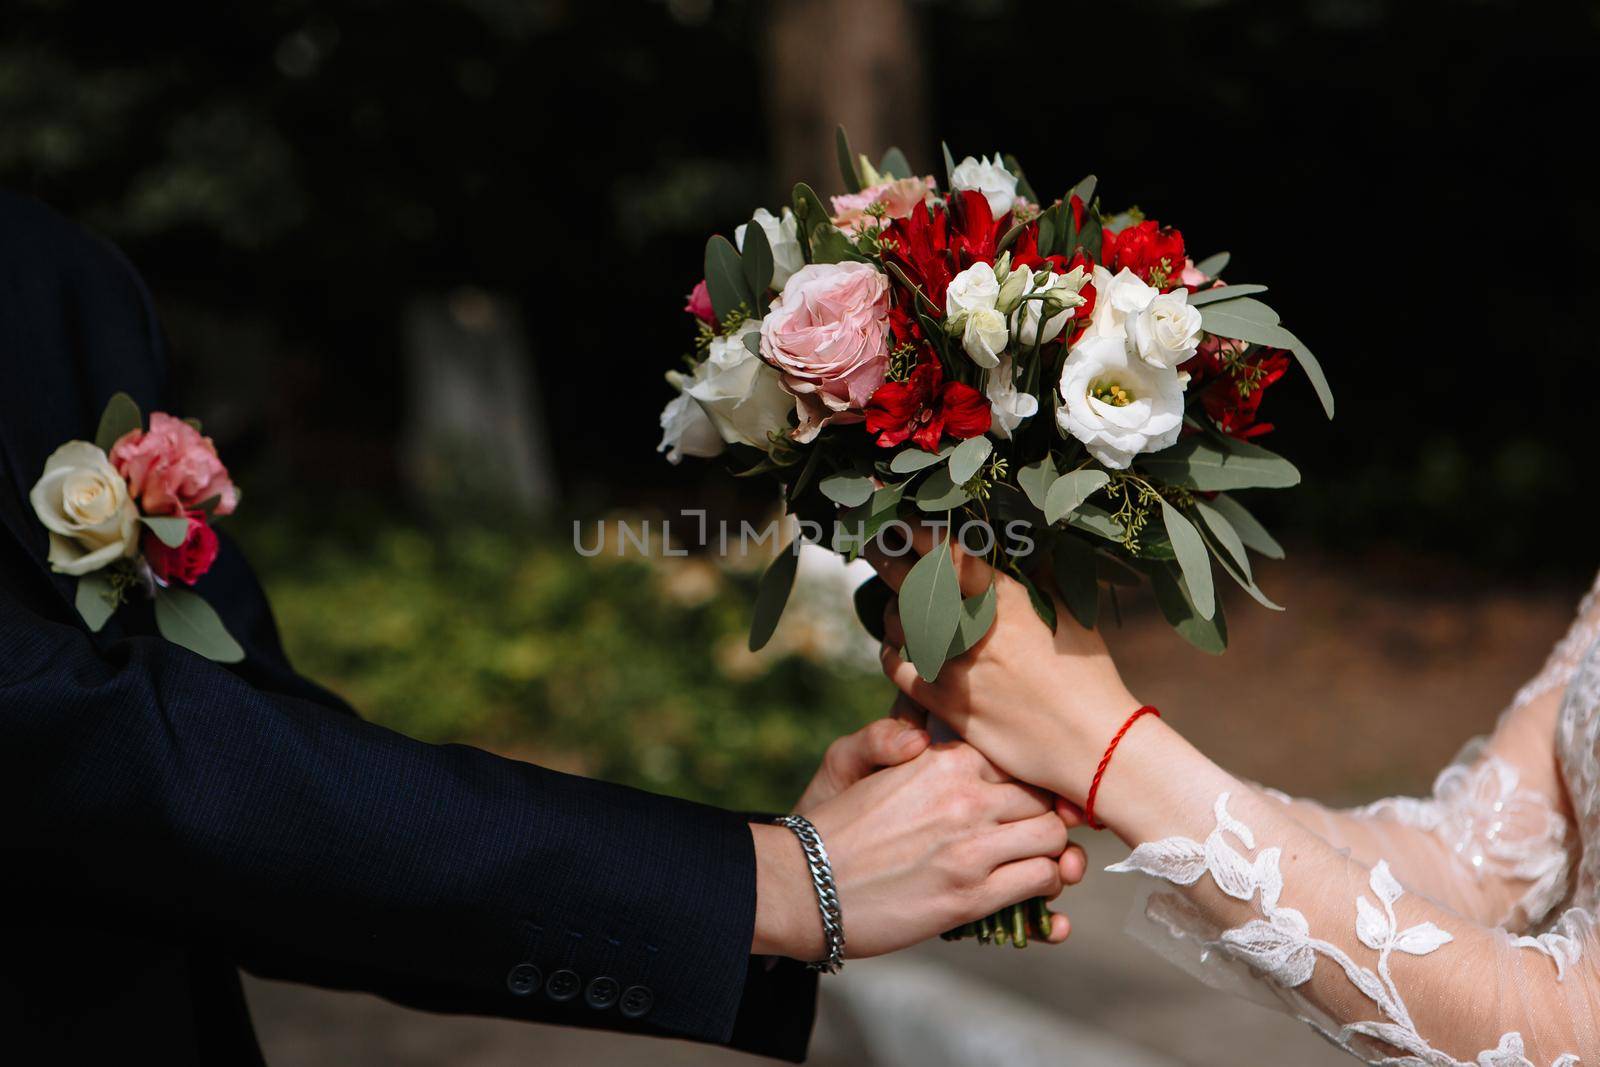 Beautiful wedding bouquet with colorful flowers. Transfer of the groom's bouquet to the bride by deandy